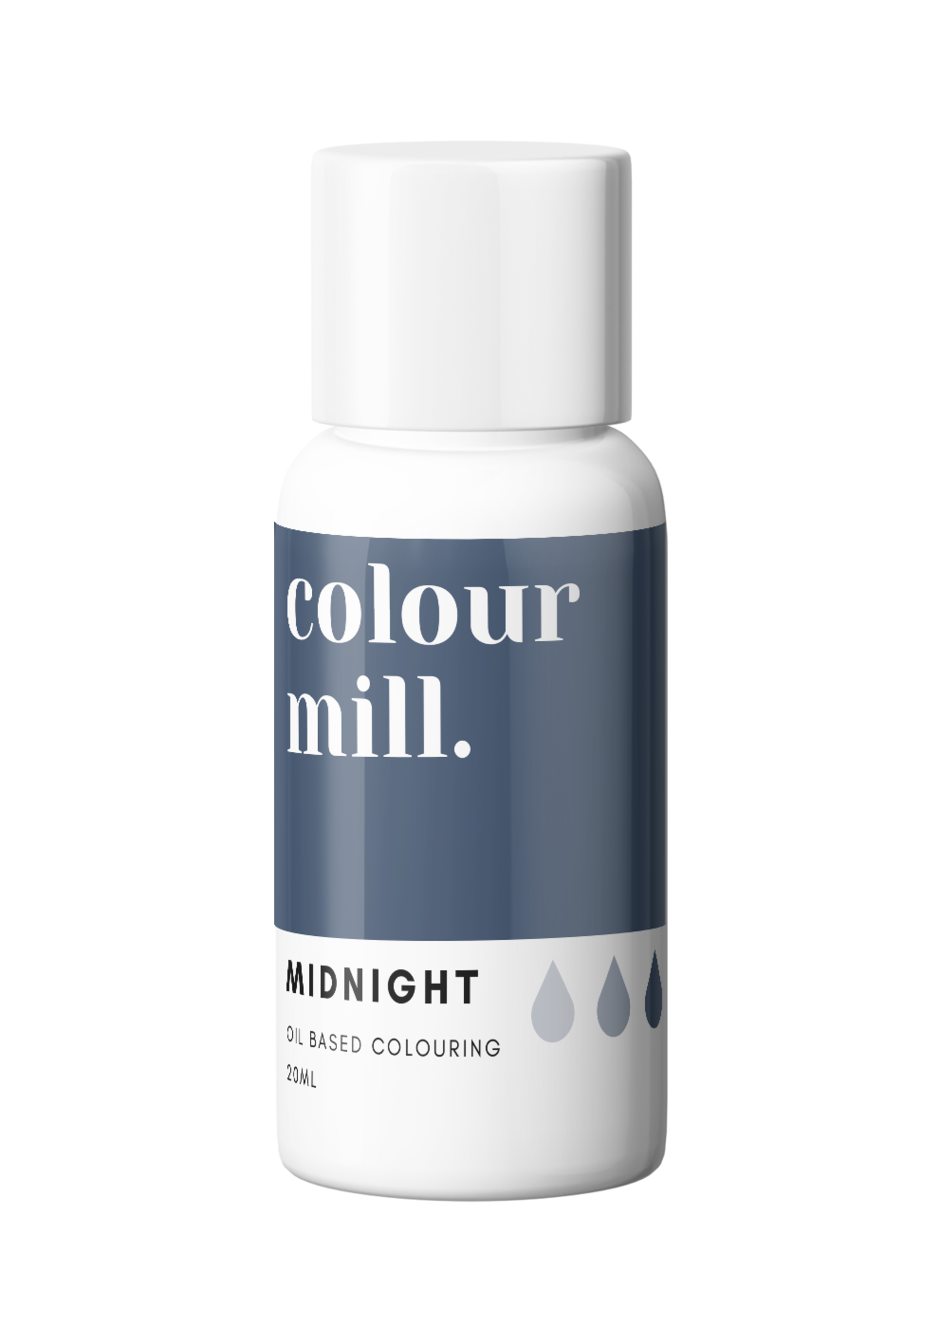 Midnight, 20ml, Colour Mill Oil Based Colouring